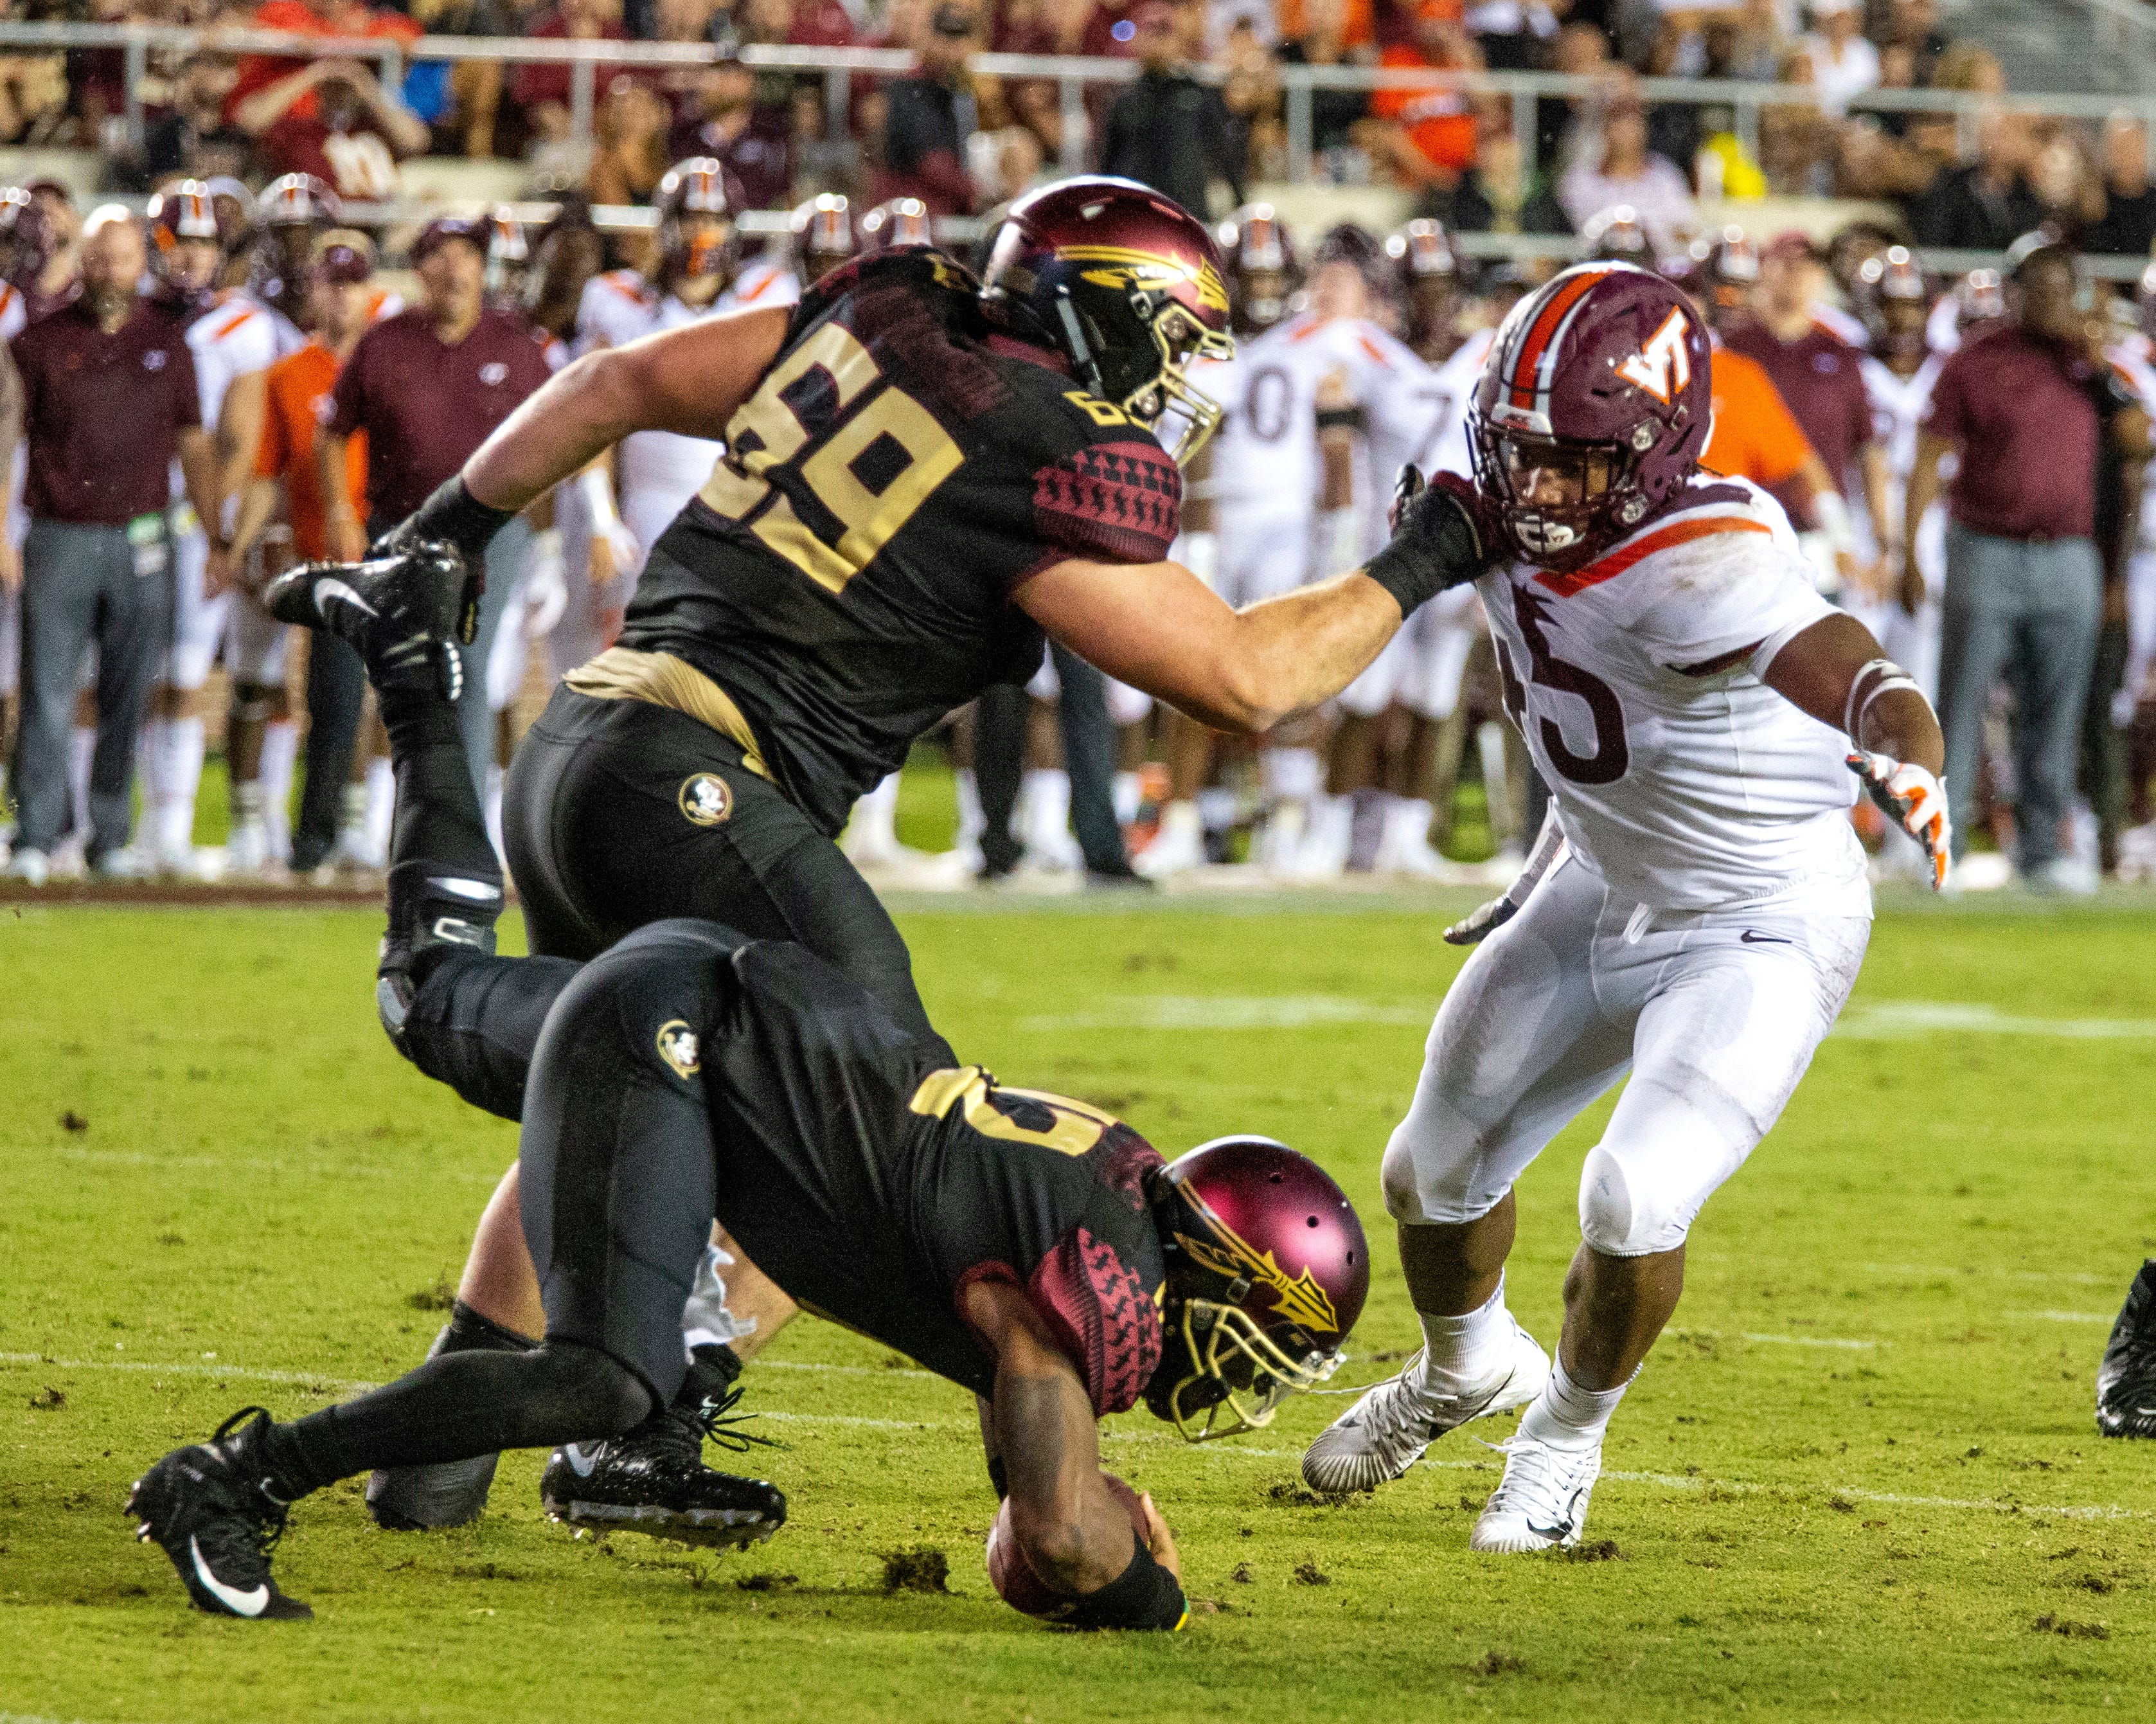 Florida State quarterback Deondre Francois (12) trips over Florida State offensive lineman Landon Dickerson (69) near his end zone in the second half of an NCAA college football game in Tallahassee, Fla., Monday, Sept. 3, 2018. Virginia Tech defeated Florida State 24-3. (AP Photo/Mark Wallheiser)